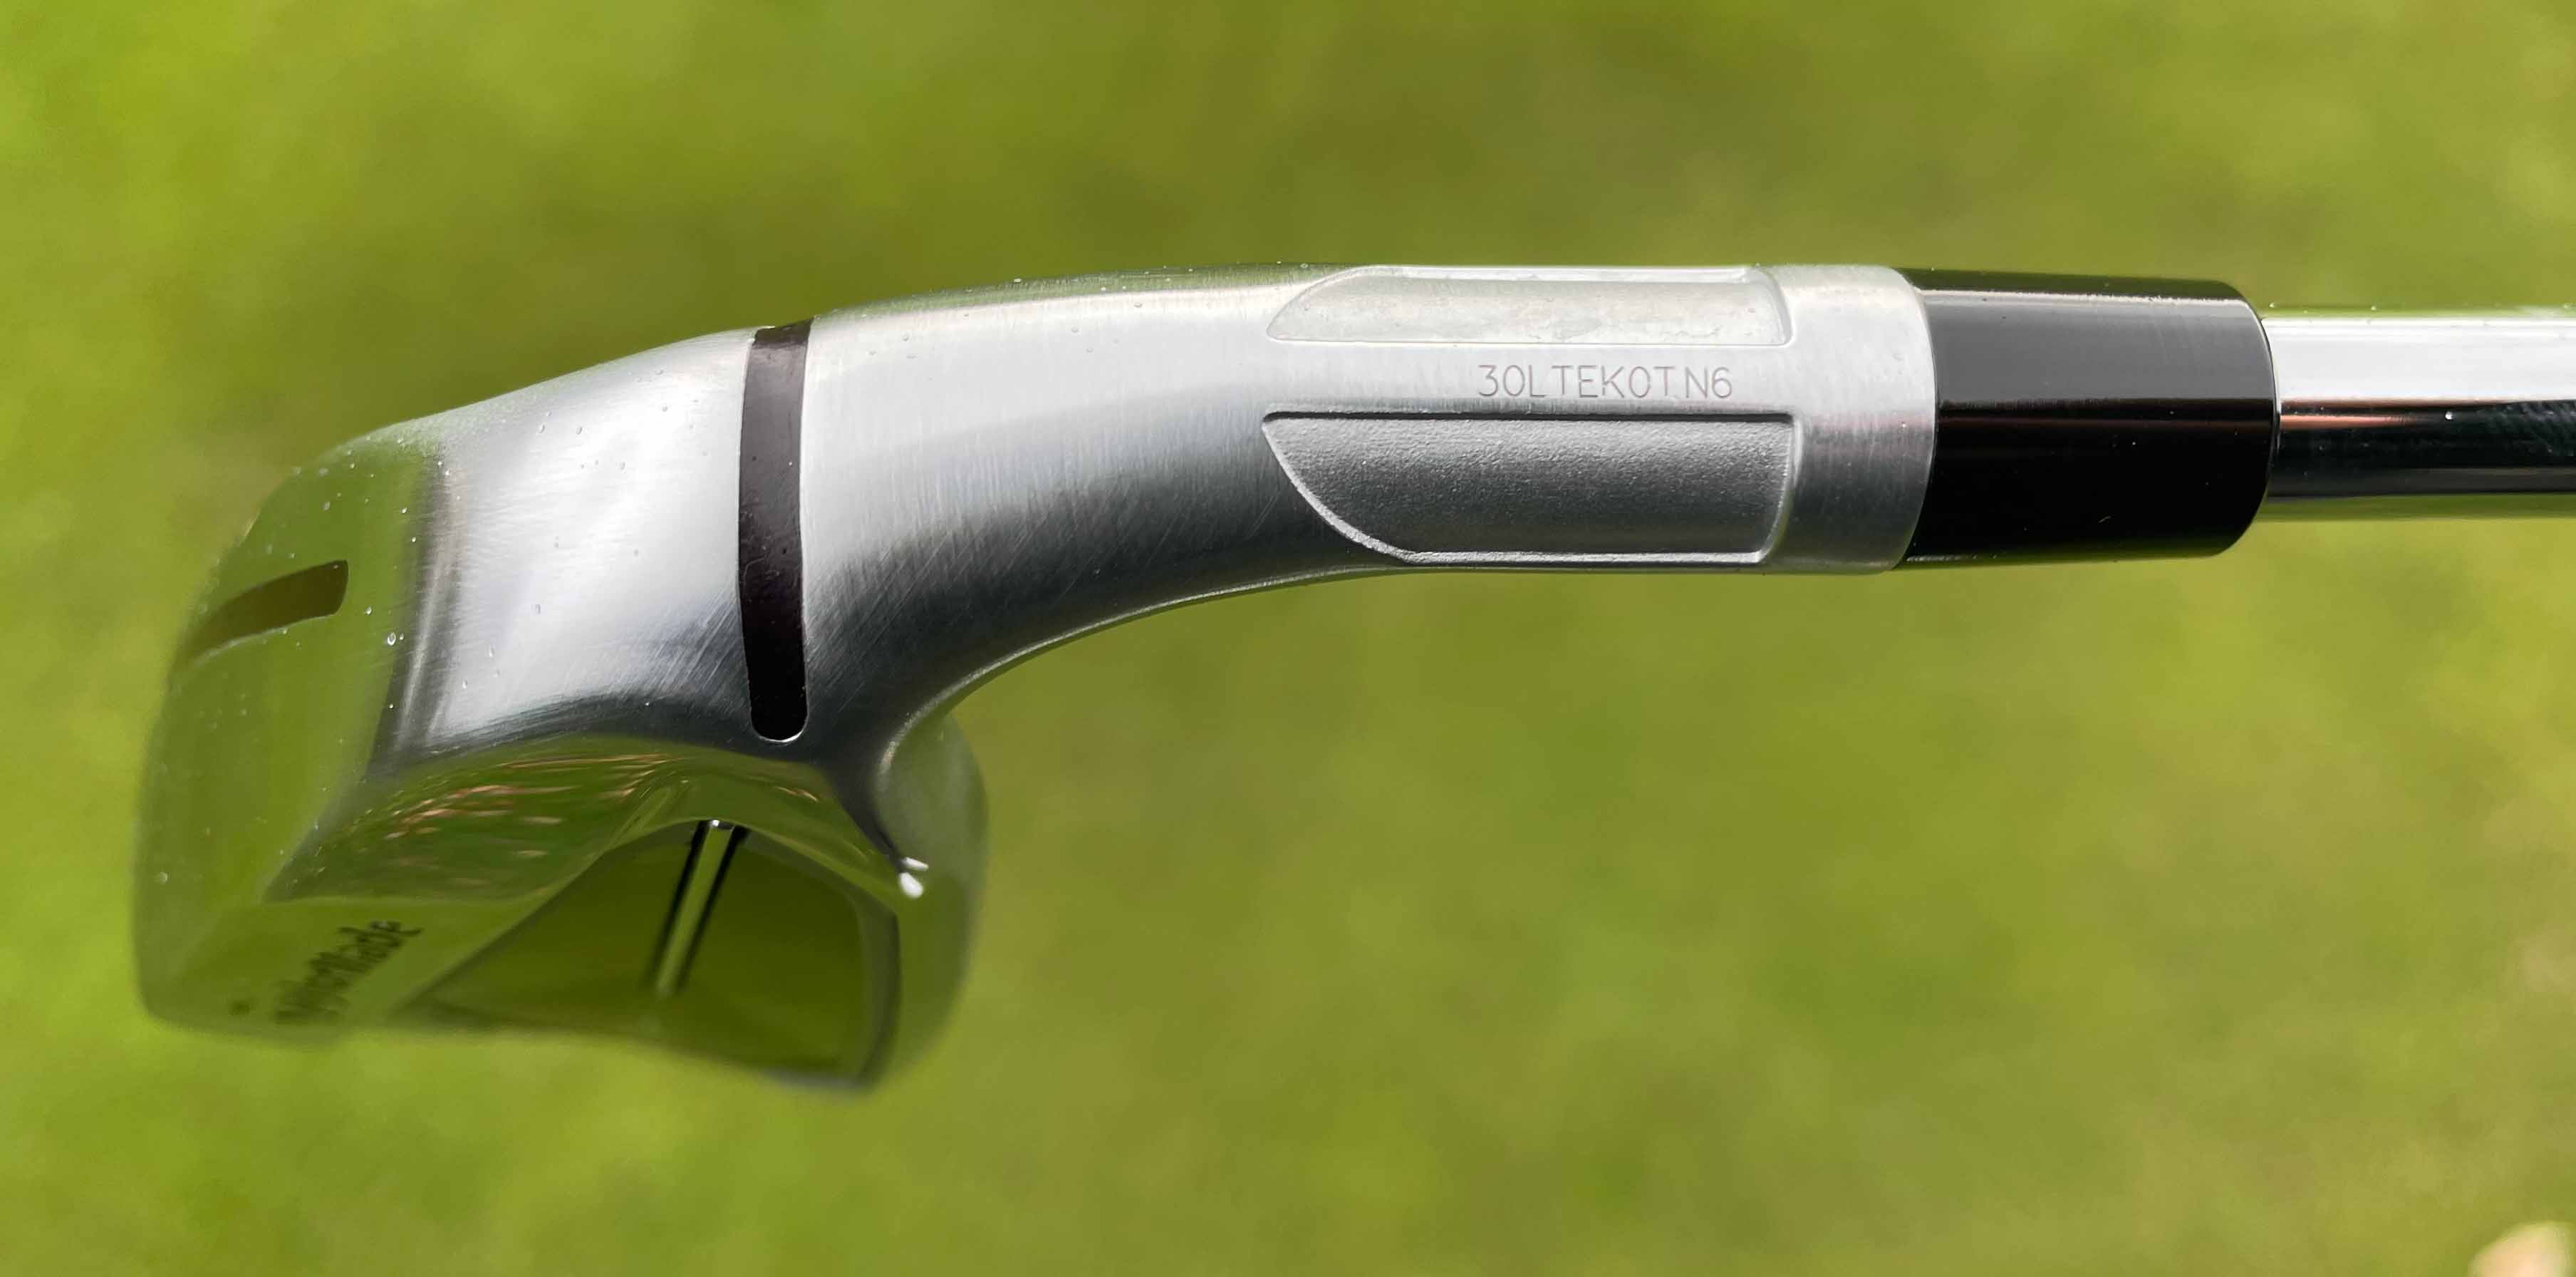 TaylorMade Qi Irons Review